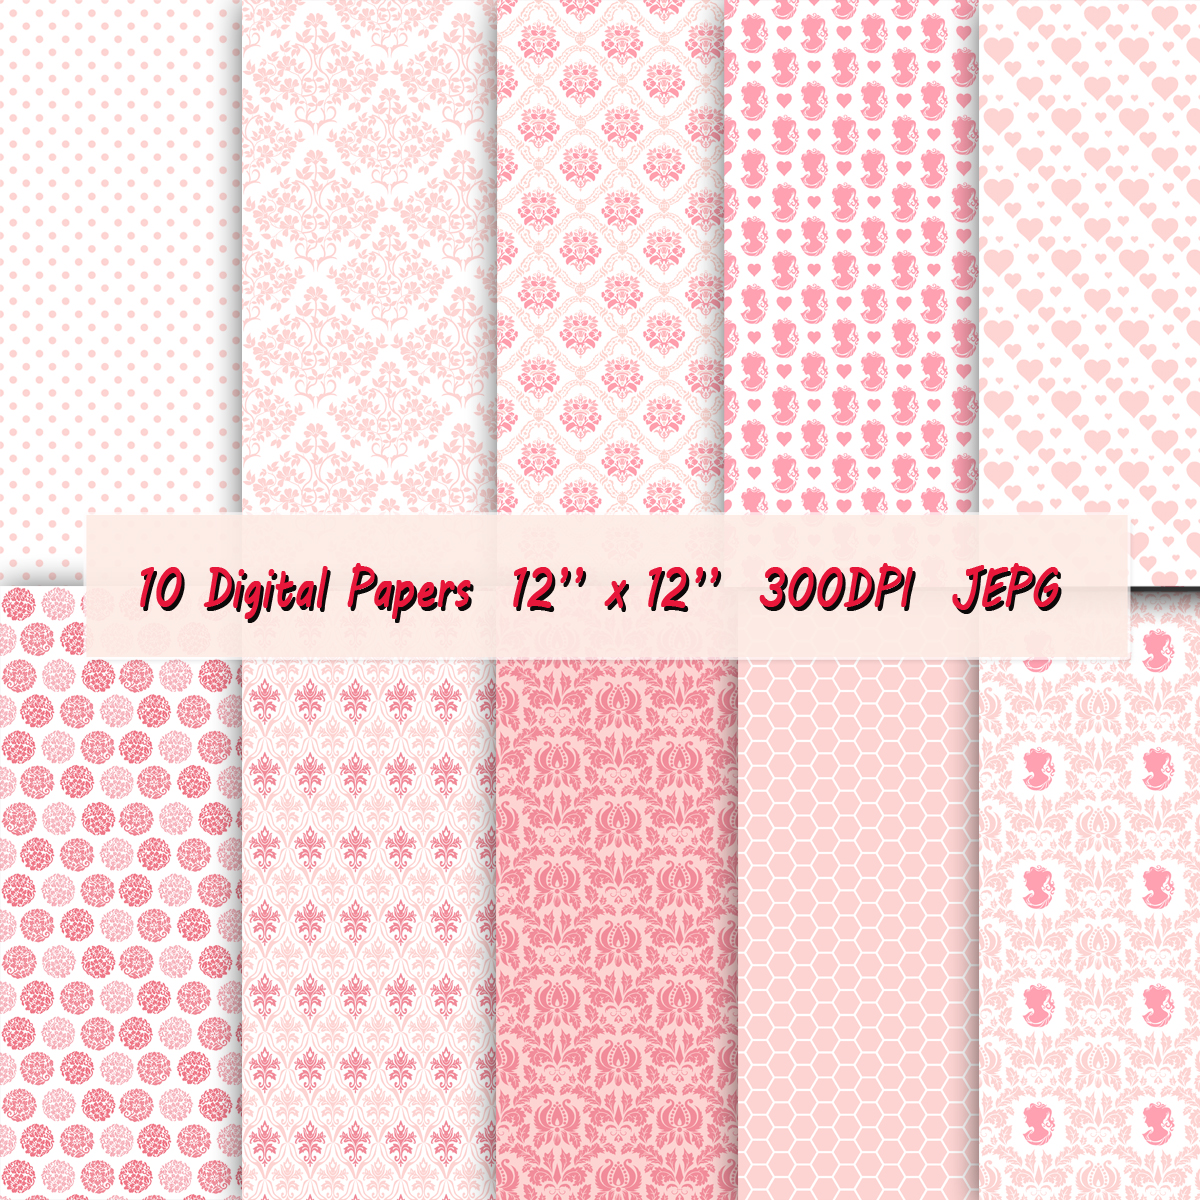 Digital Paper For Scrapbook With Cameo Pattern, Hearts, Damask, Flowers And Honey Comb Background In A Lovely Shade Of Pink And Coral.